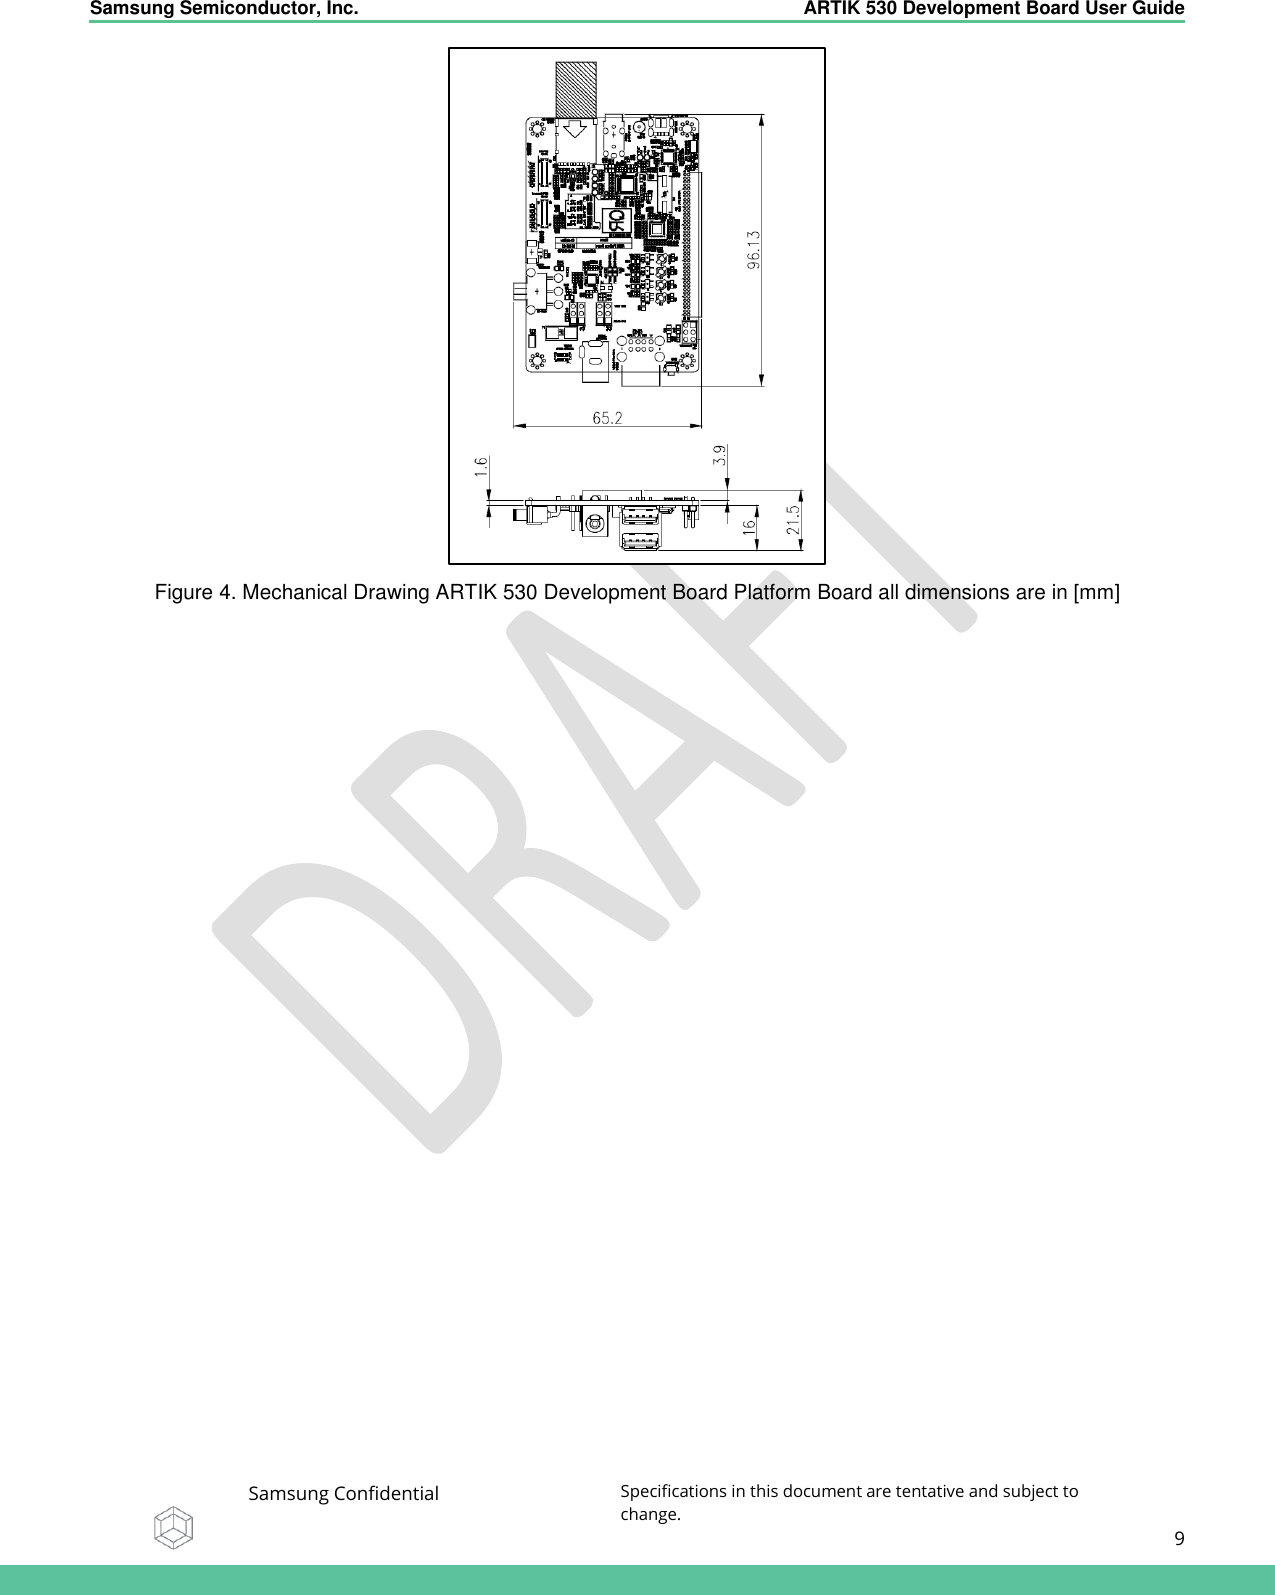    Samsung Semiconductor, Inc.  ARTIK 530 Development Board User Guide   Samsung Confidential Specifications in this document are tentative and subject to change.  9    Figure 4. Mechanical Drawing ARTIK 530 Development Board Platform Board all dimensions are in [mm]   